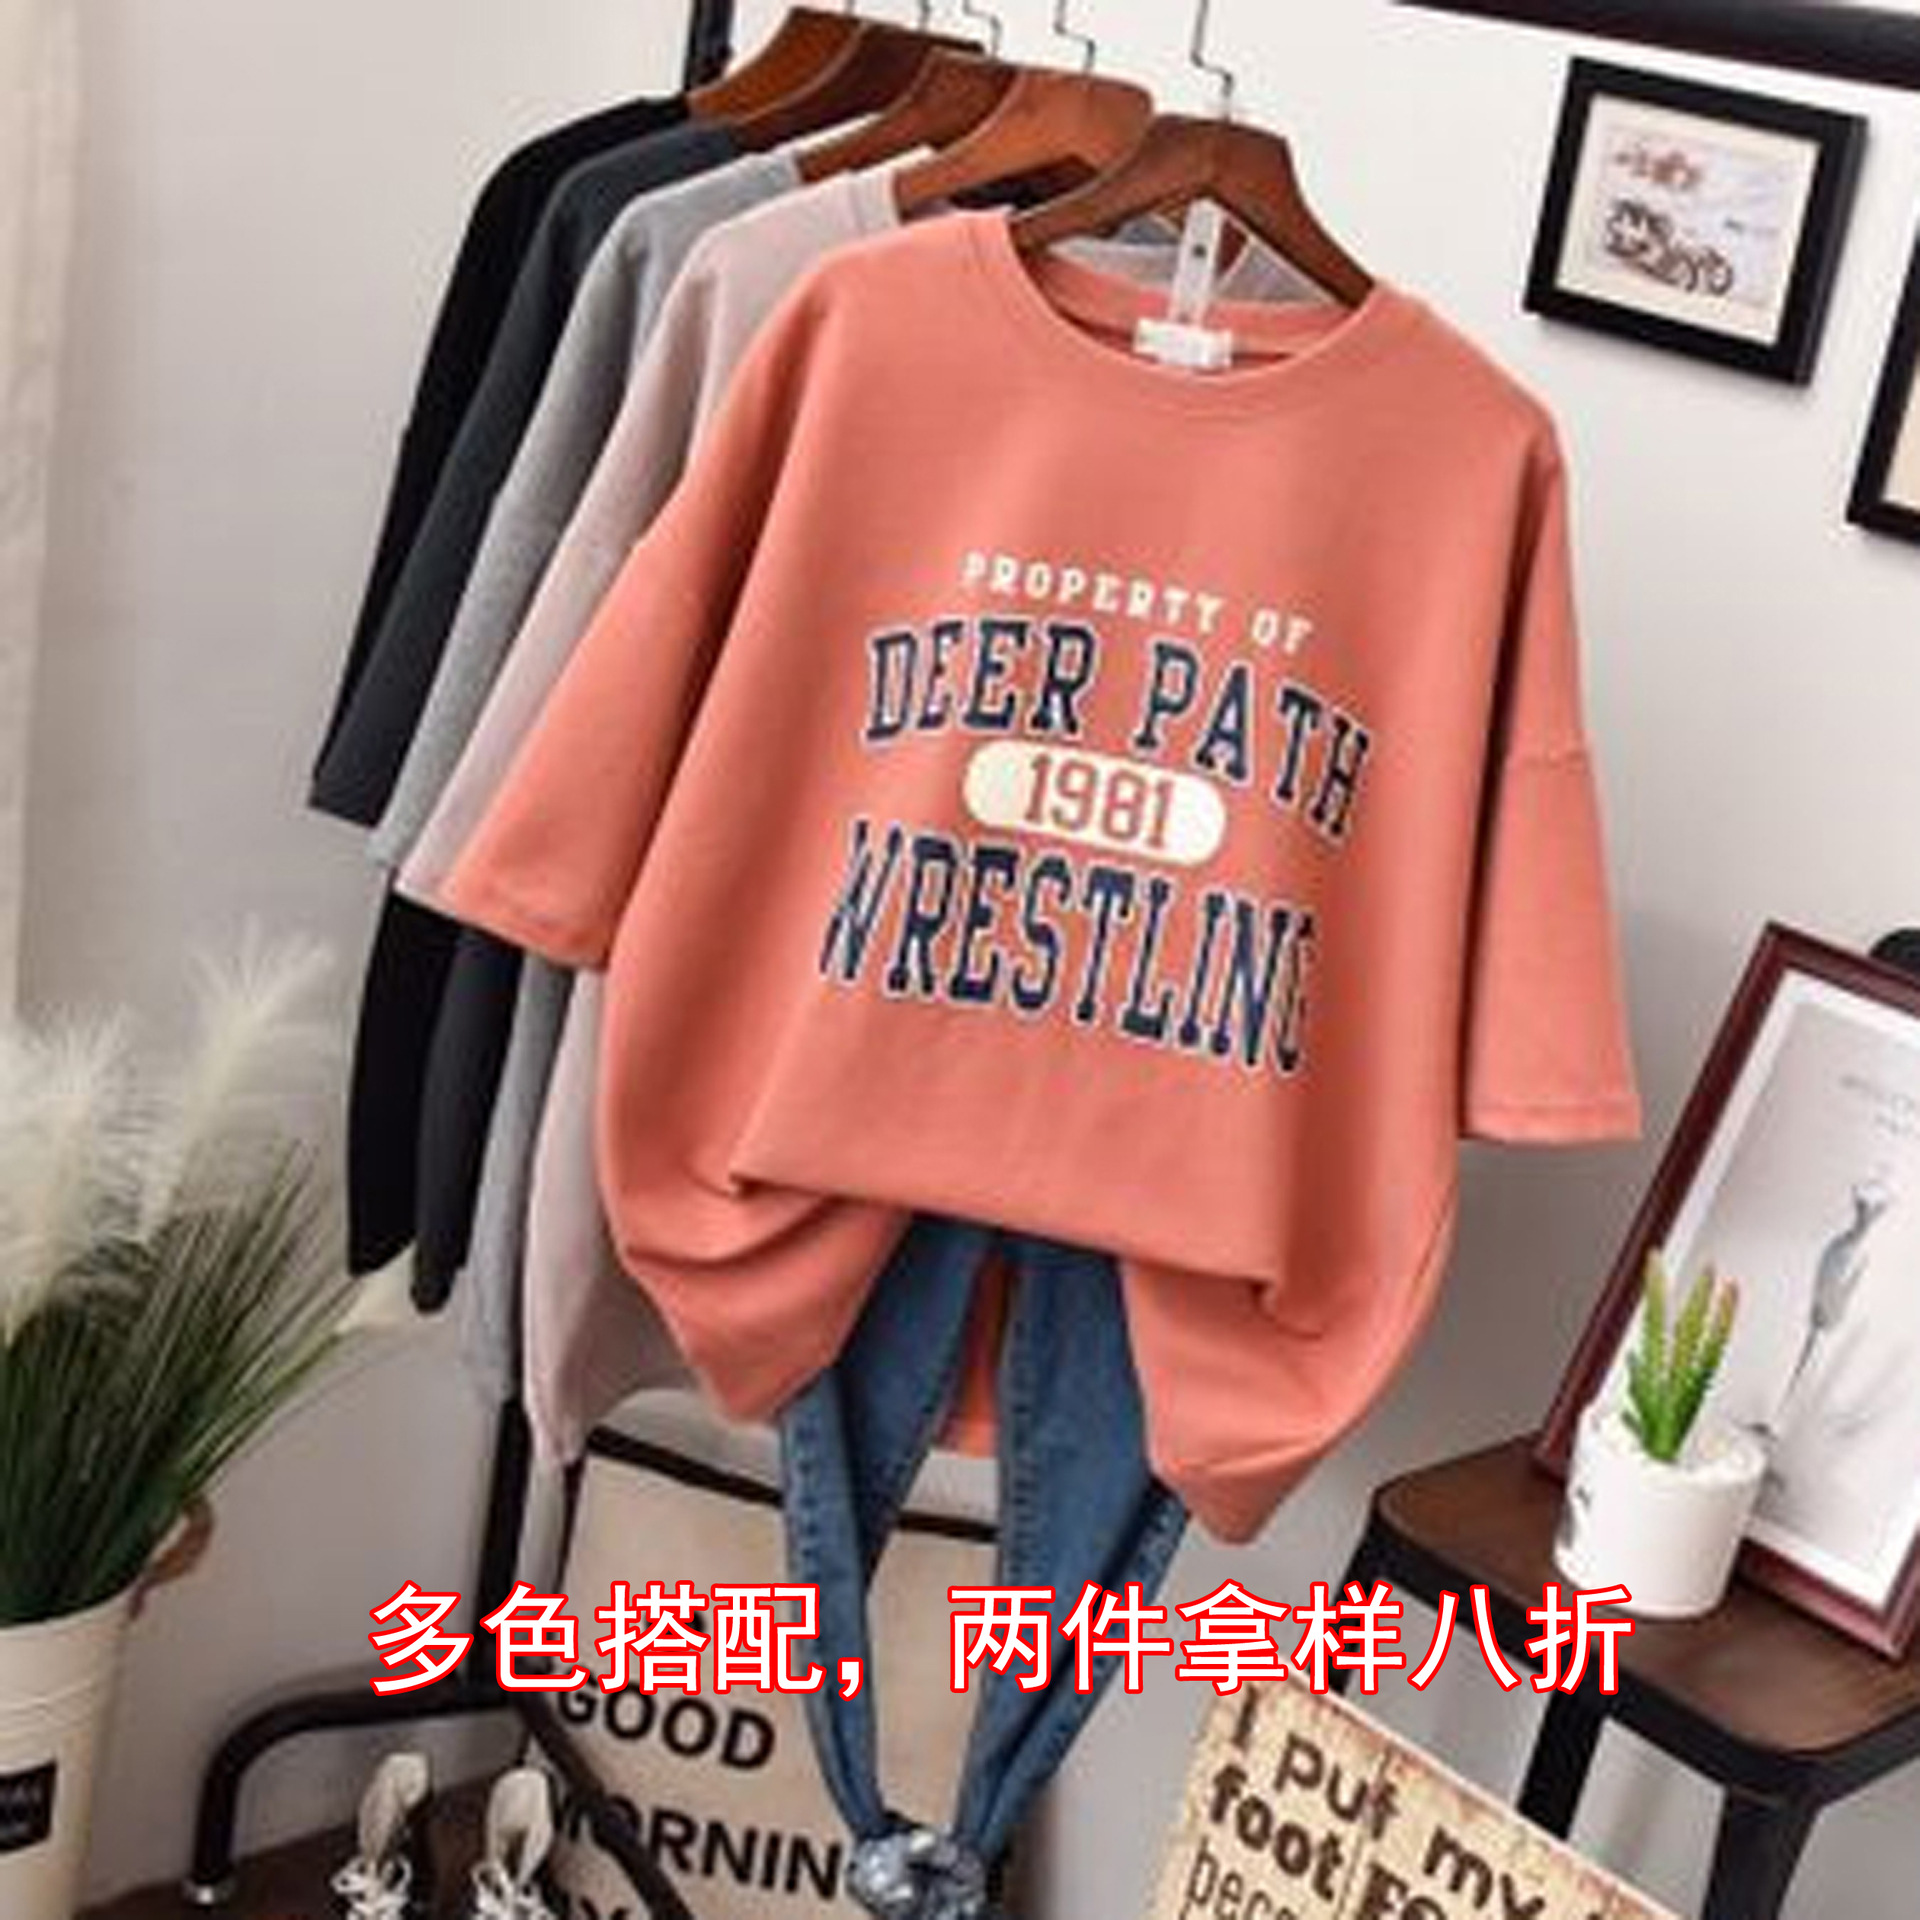 spring and summer 2022 new women‘s short sleeve t-shirt under 5 yuan fashion brand large size women‘s stall running quantity supply 168